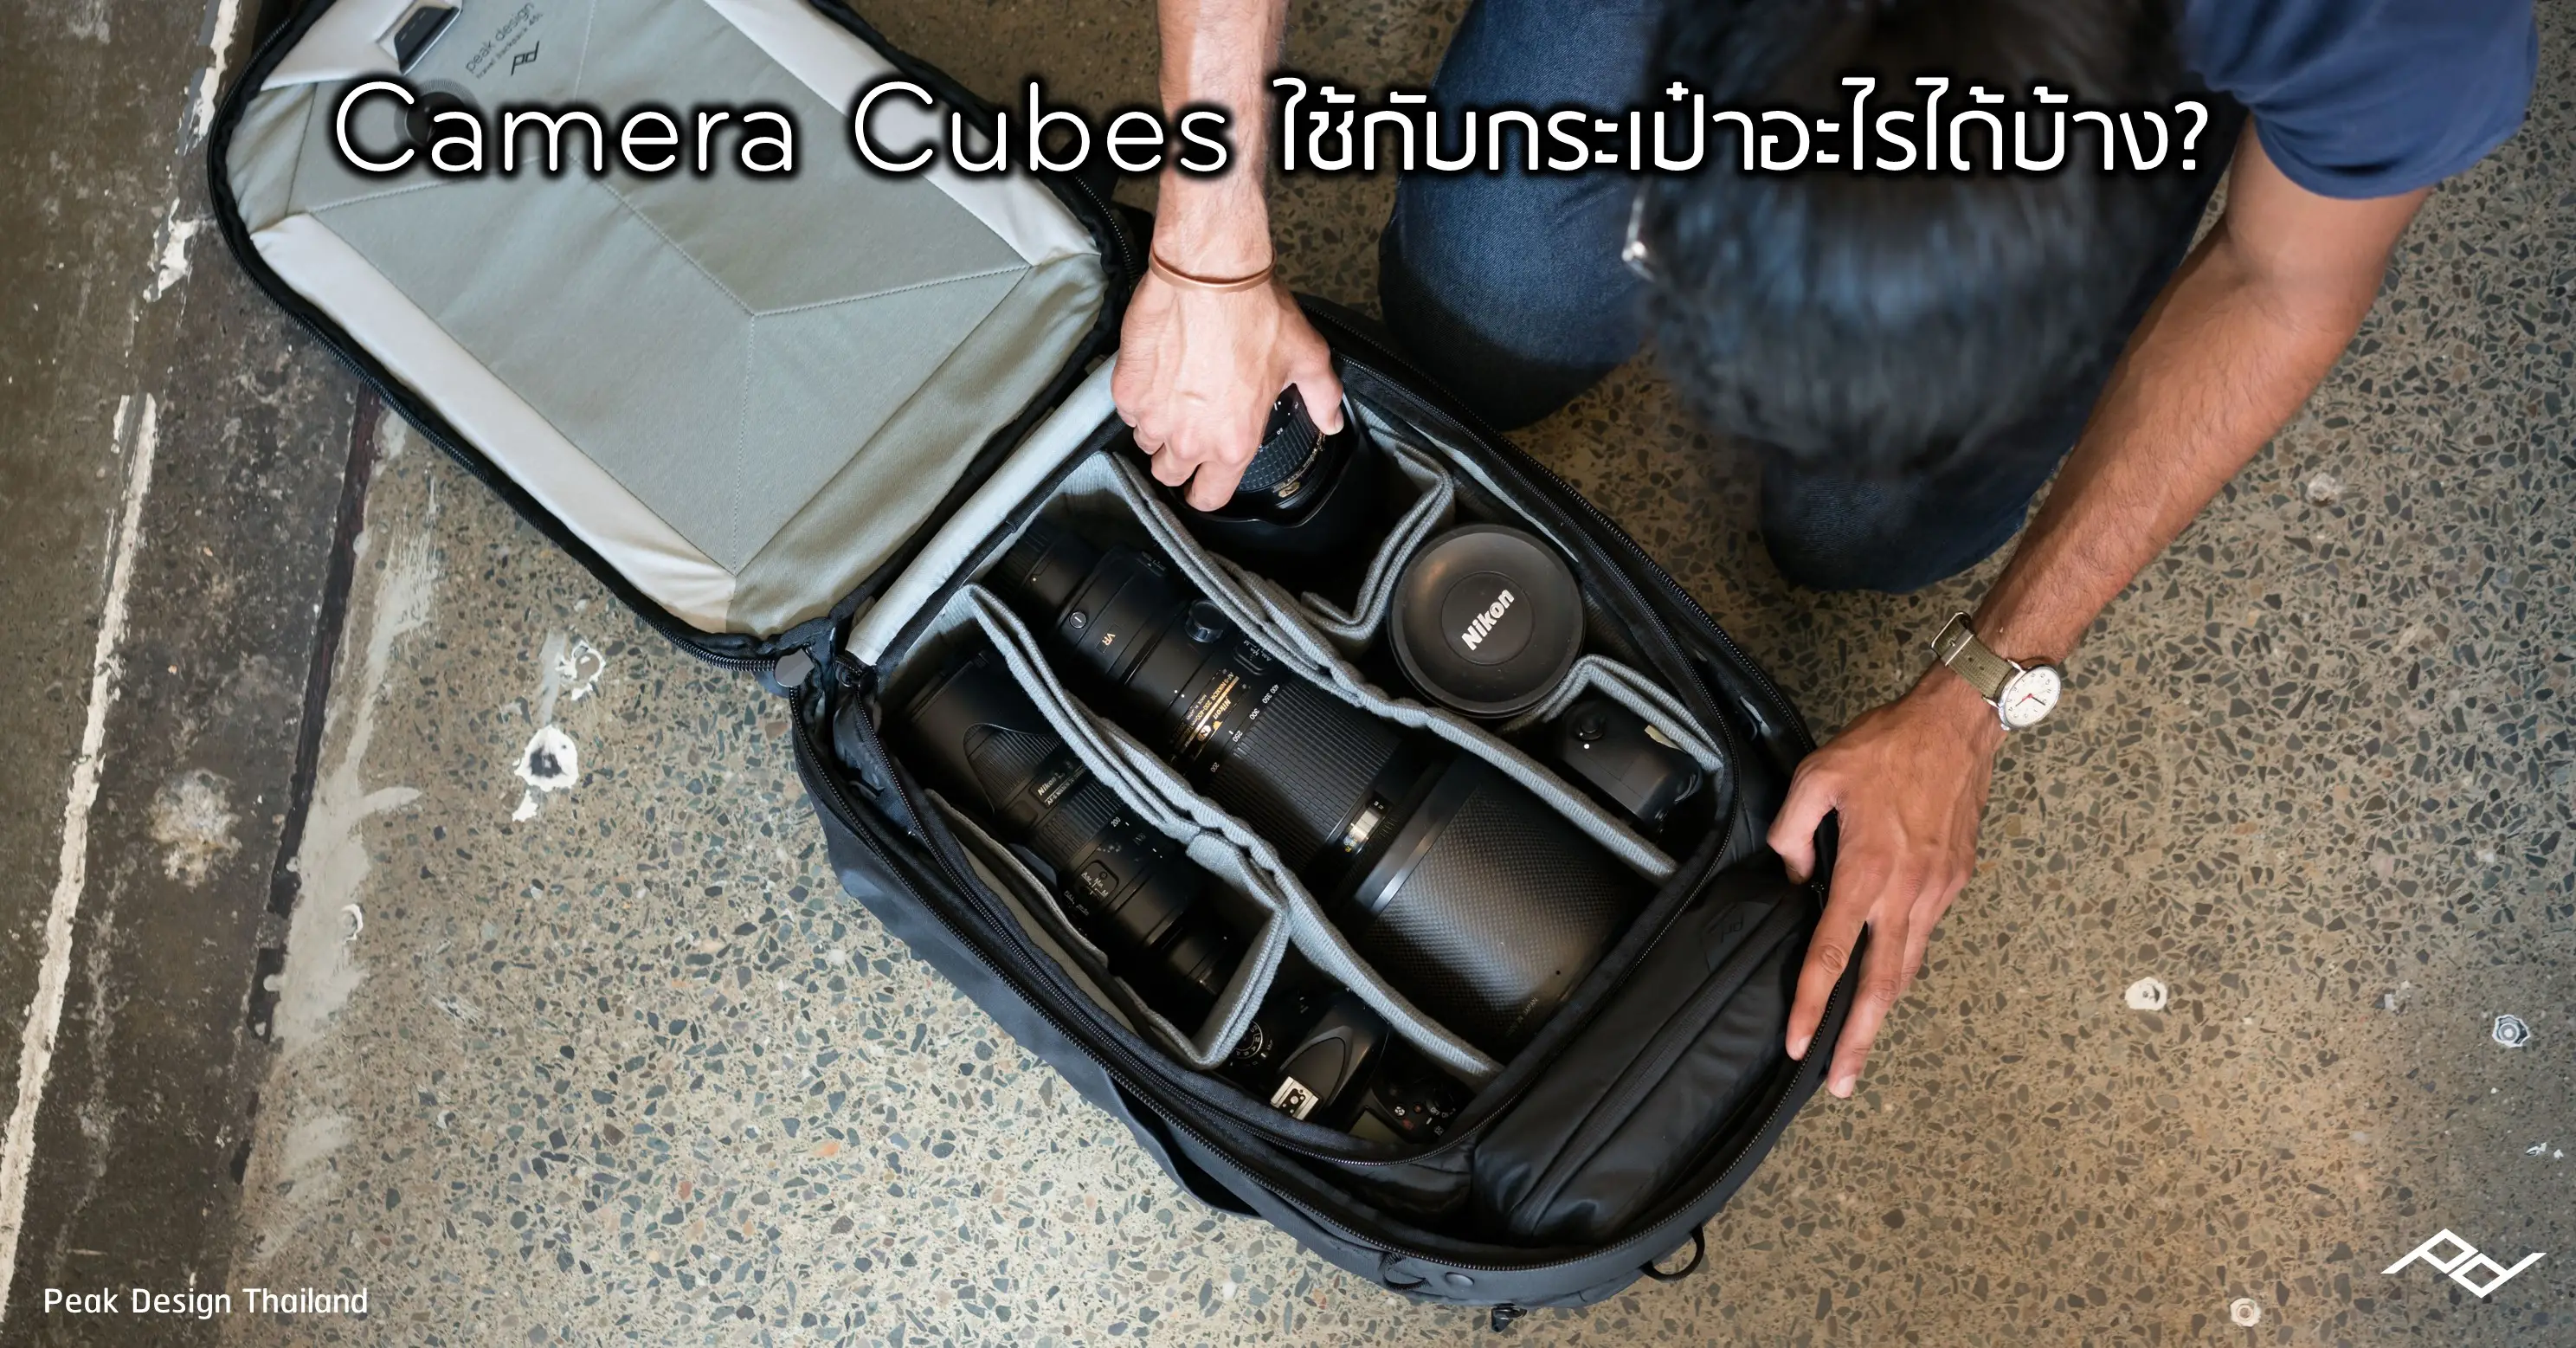 what-kind-of-bags-can-be-use-camera-cubes-cover